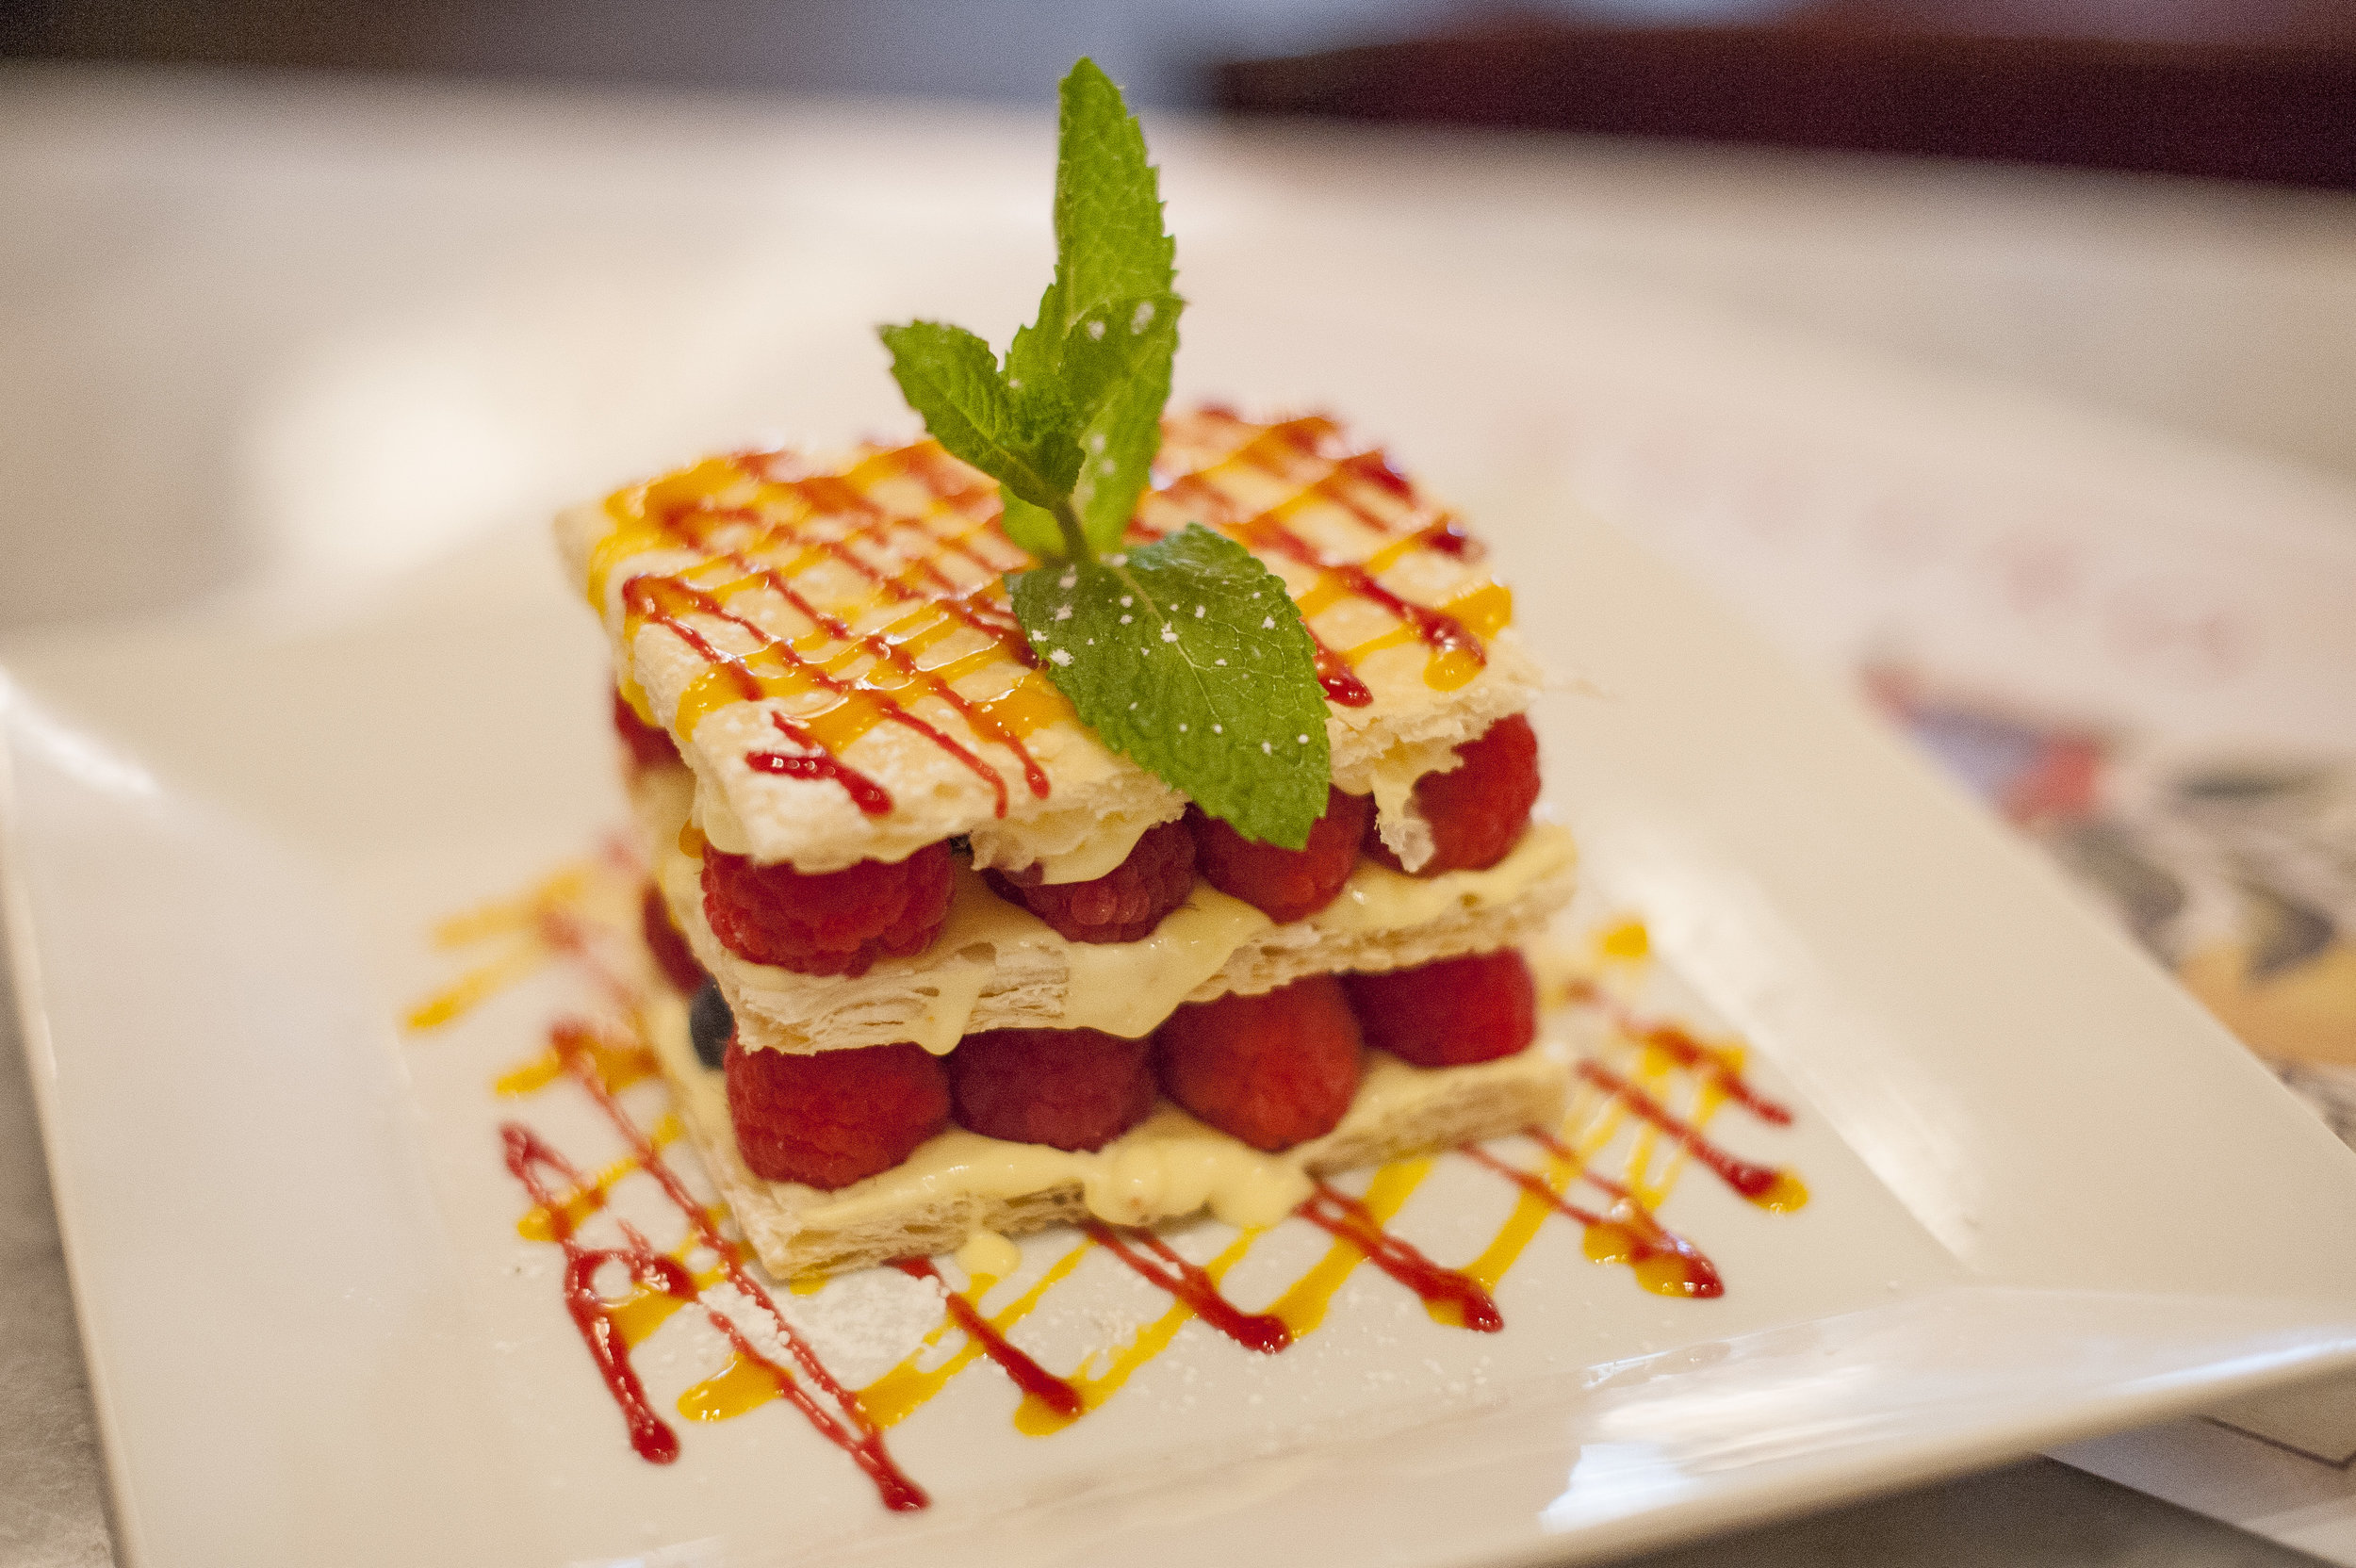  The Mille-Feuille ($12) layers tantalizing mixed fresh fruit with mascarpone cream in a delicately flaky puffed pastry. 